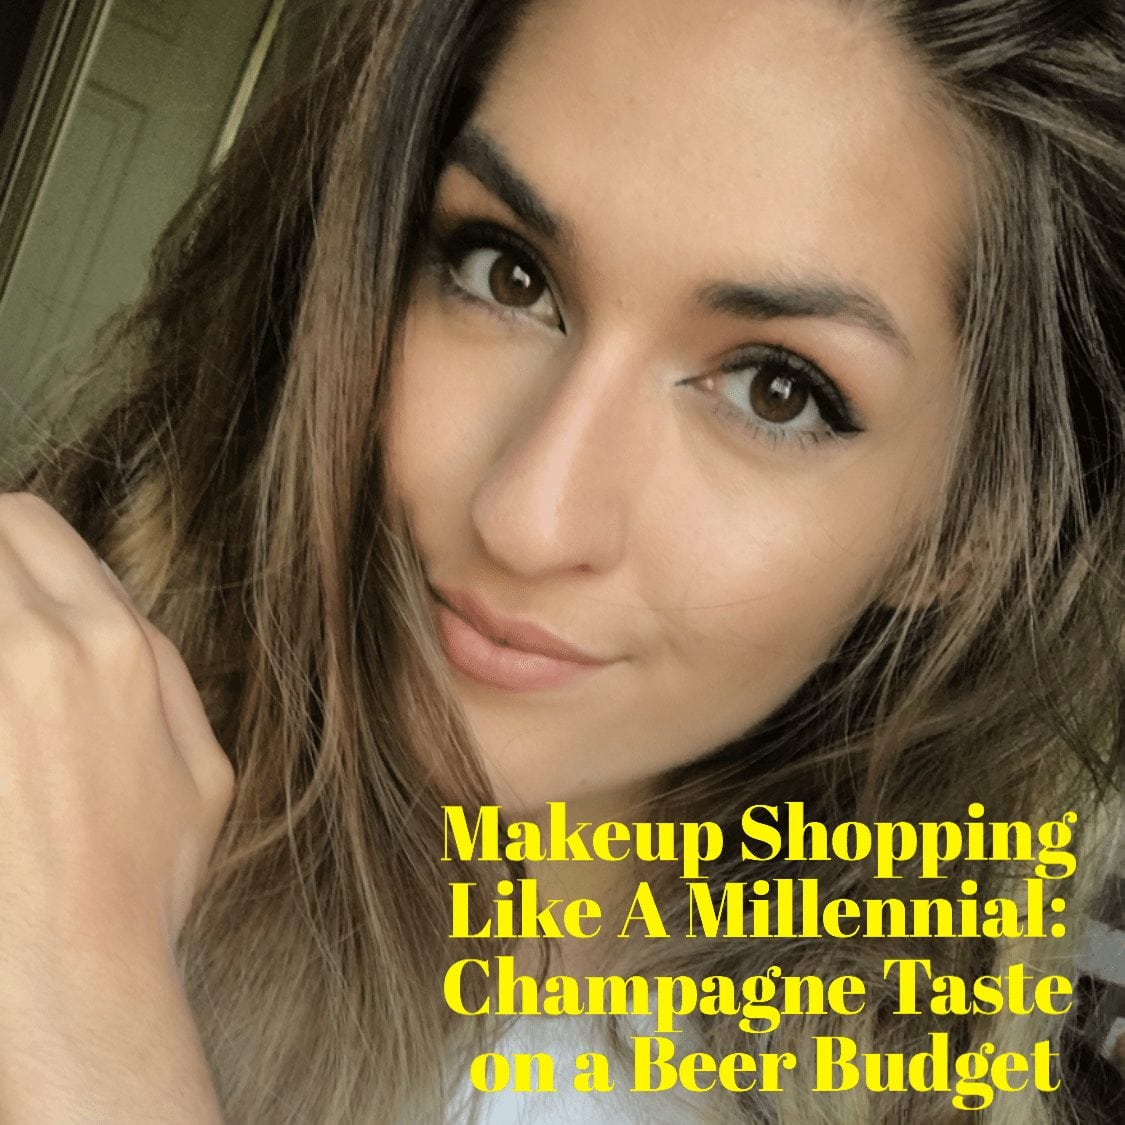 Azadeh - Makeup Shopping Like A Millennial: Champagne Taste on a Beer Budget